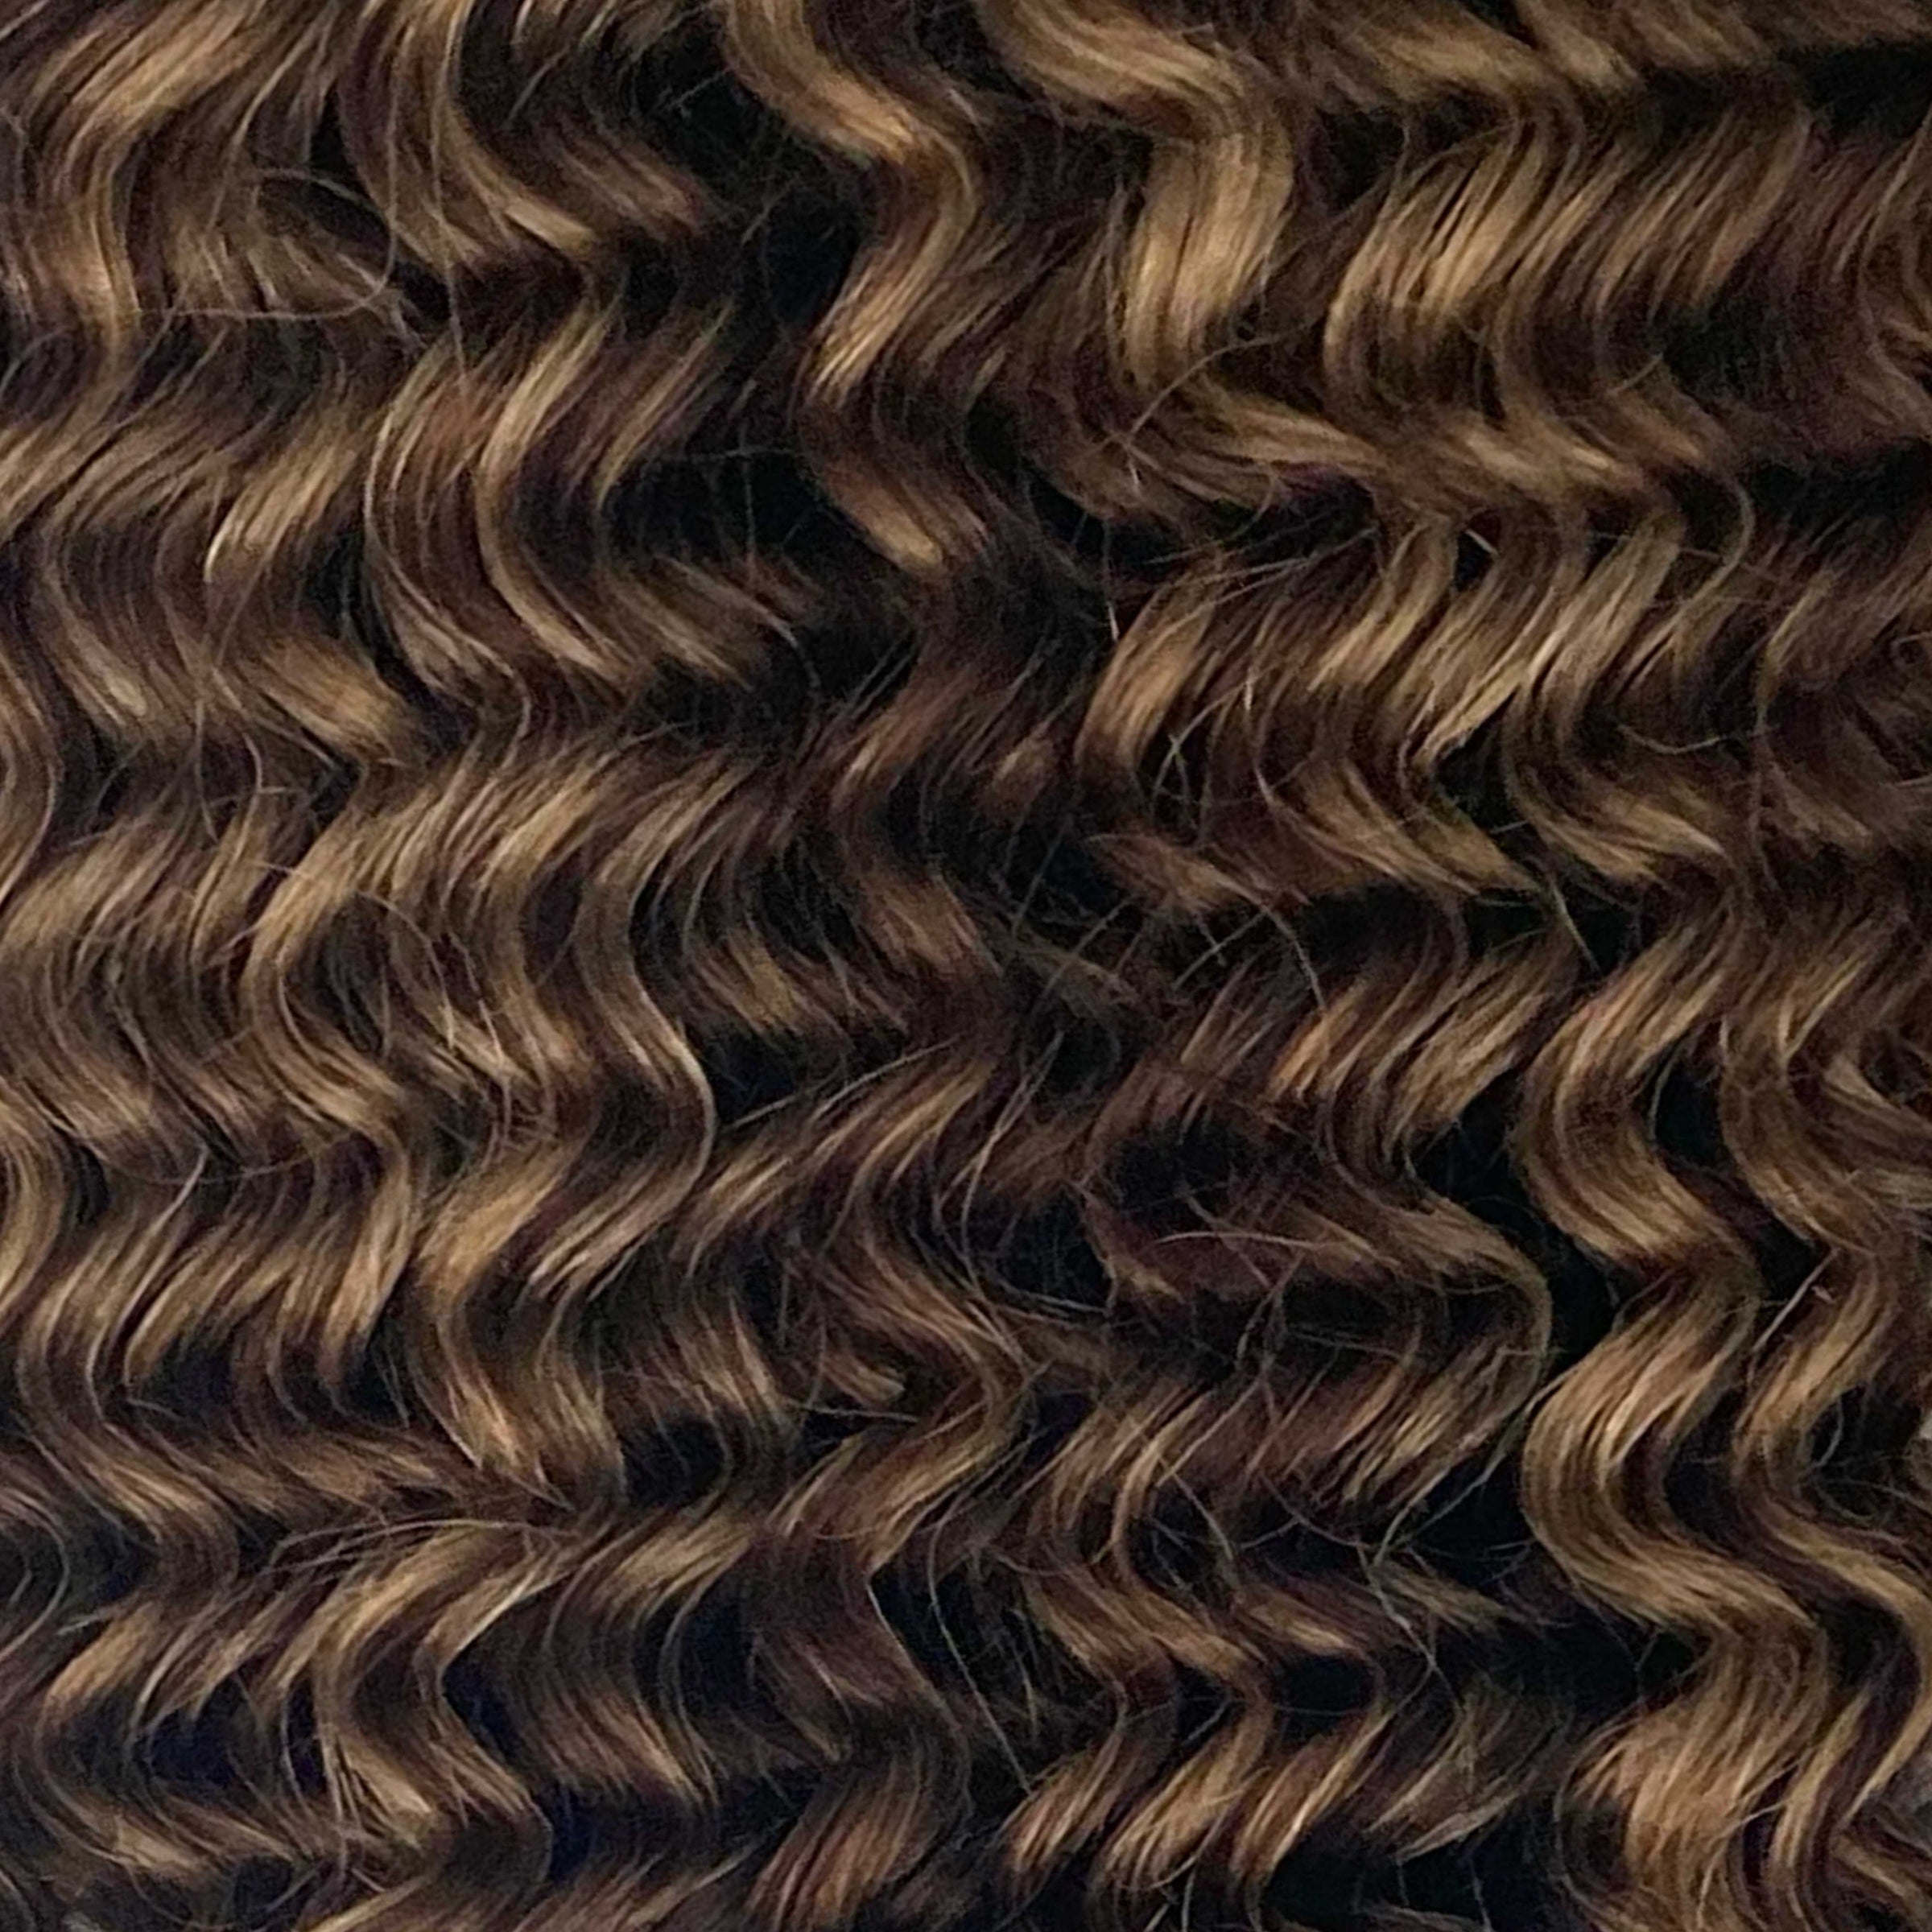 Weft Curly Hair Extensions 3C 25" - #2/16 Dark Brown and Natural Blonde Highlights